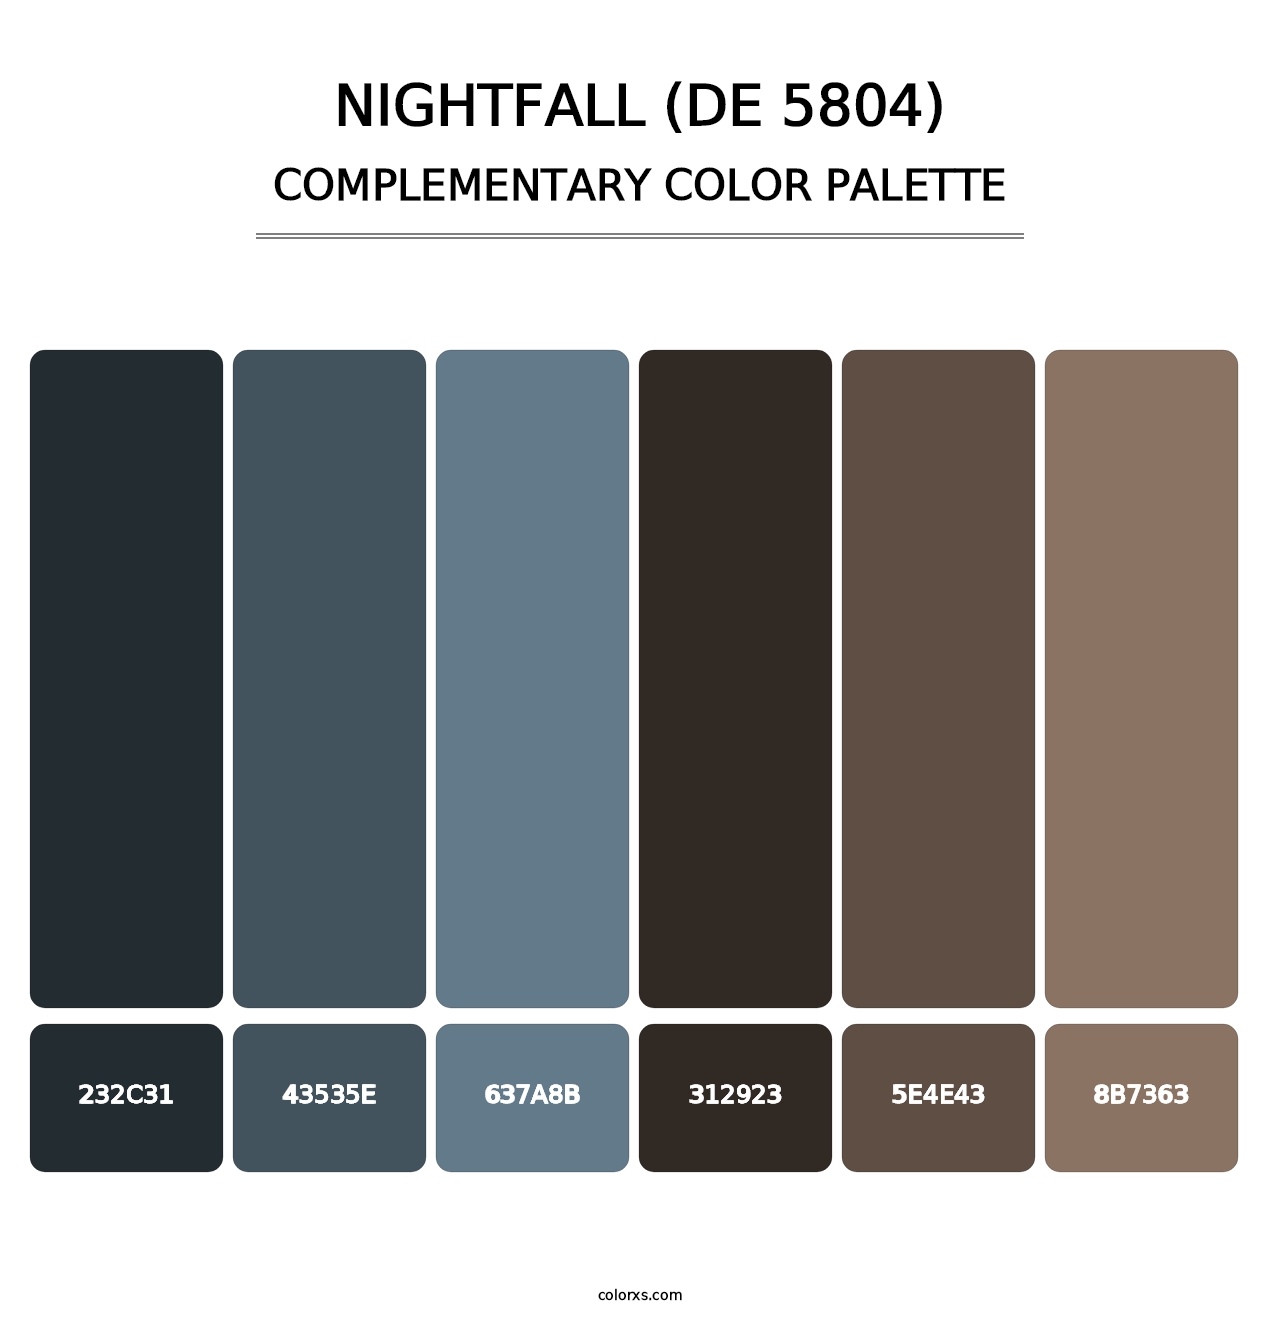 Nightfall (DE 5804) - Complementary Color Palette